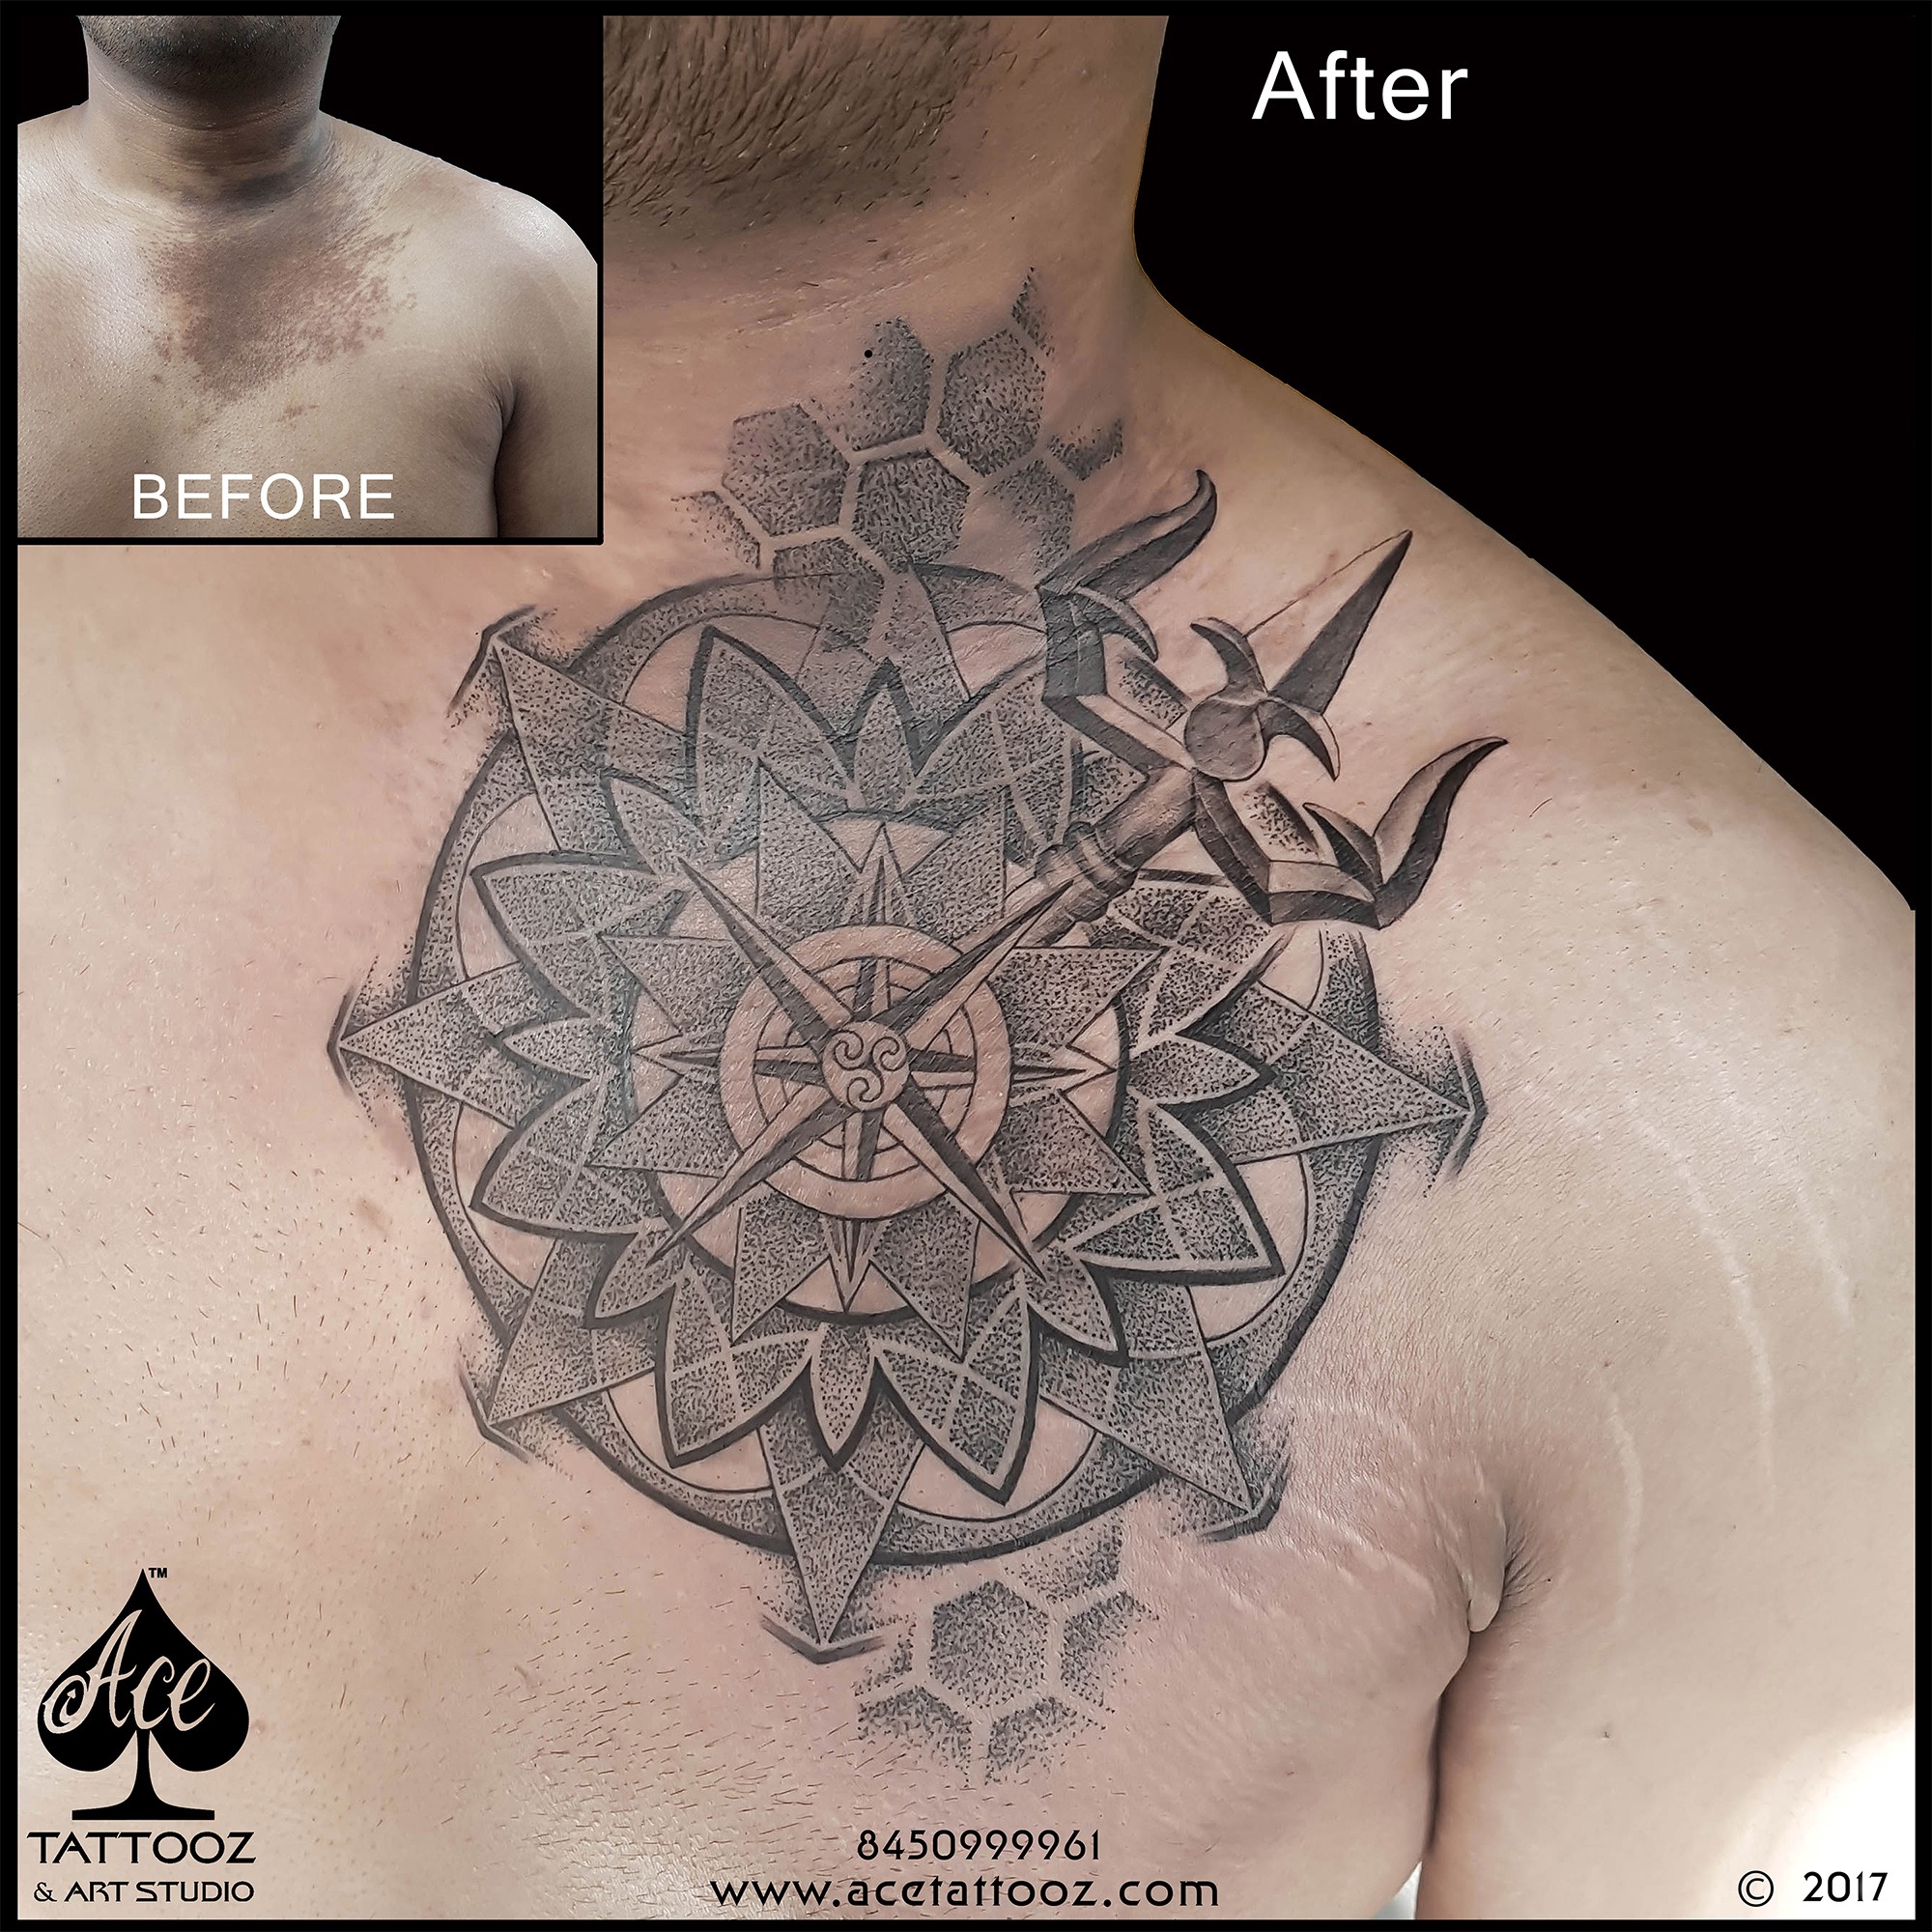 Tattooing Over A Scar: Everything You Need To Know | Scars tattoo cover up,  Tattoo over scar, Tattoos to cover scars